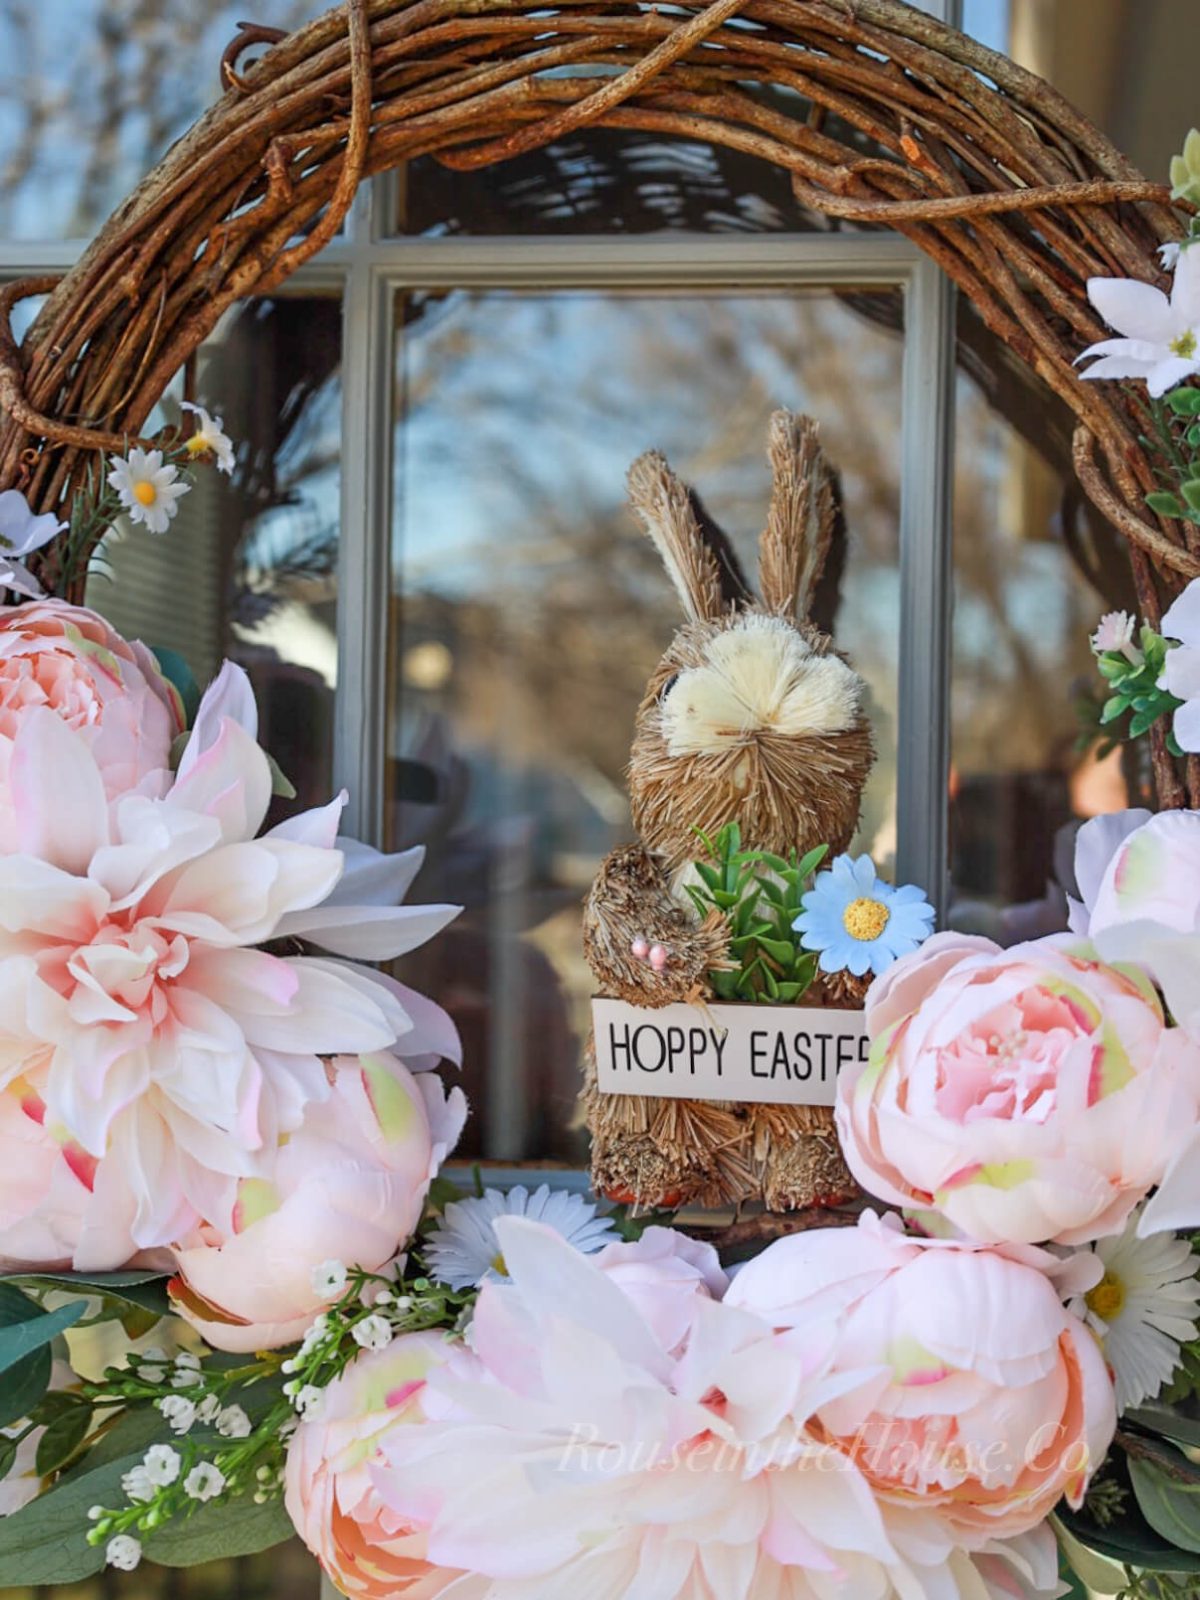 Pink Spring Flower Wreath with a Dollar Tree Sisal Bunny holding a sign that says "Hoppy Easter".